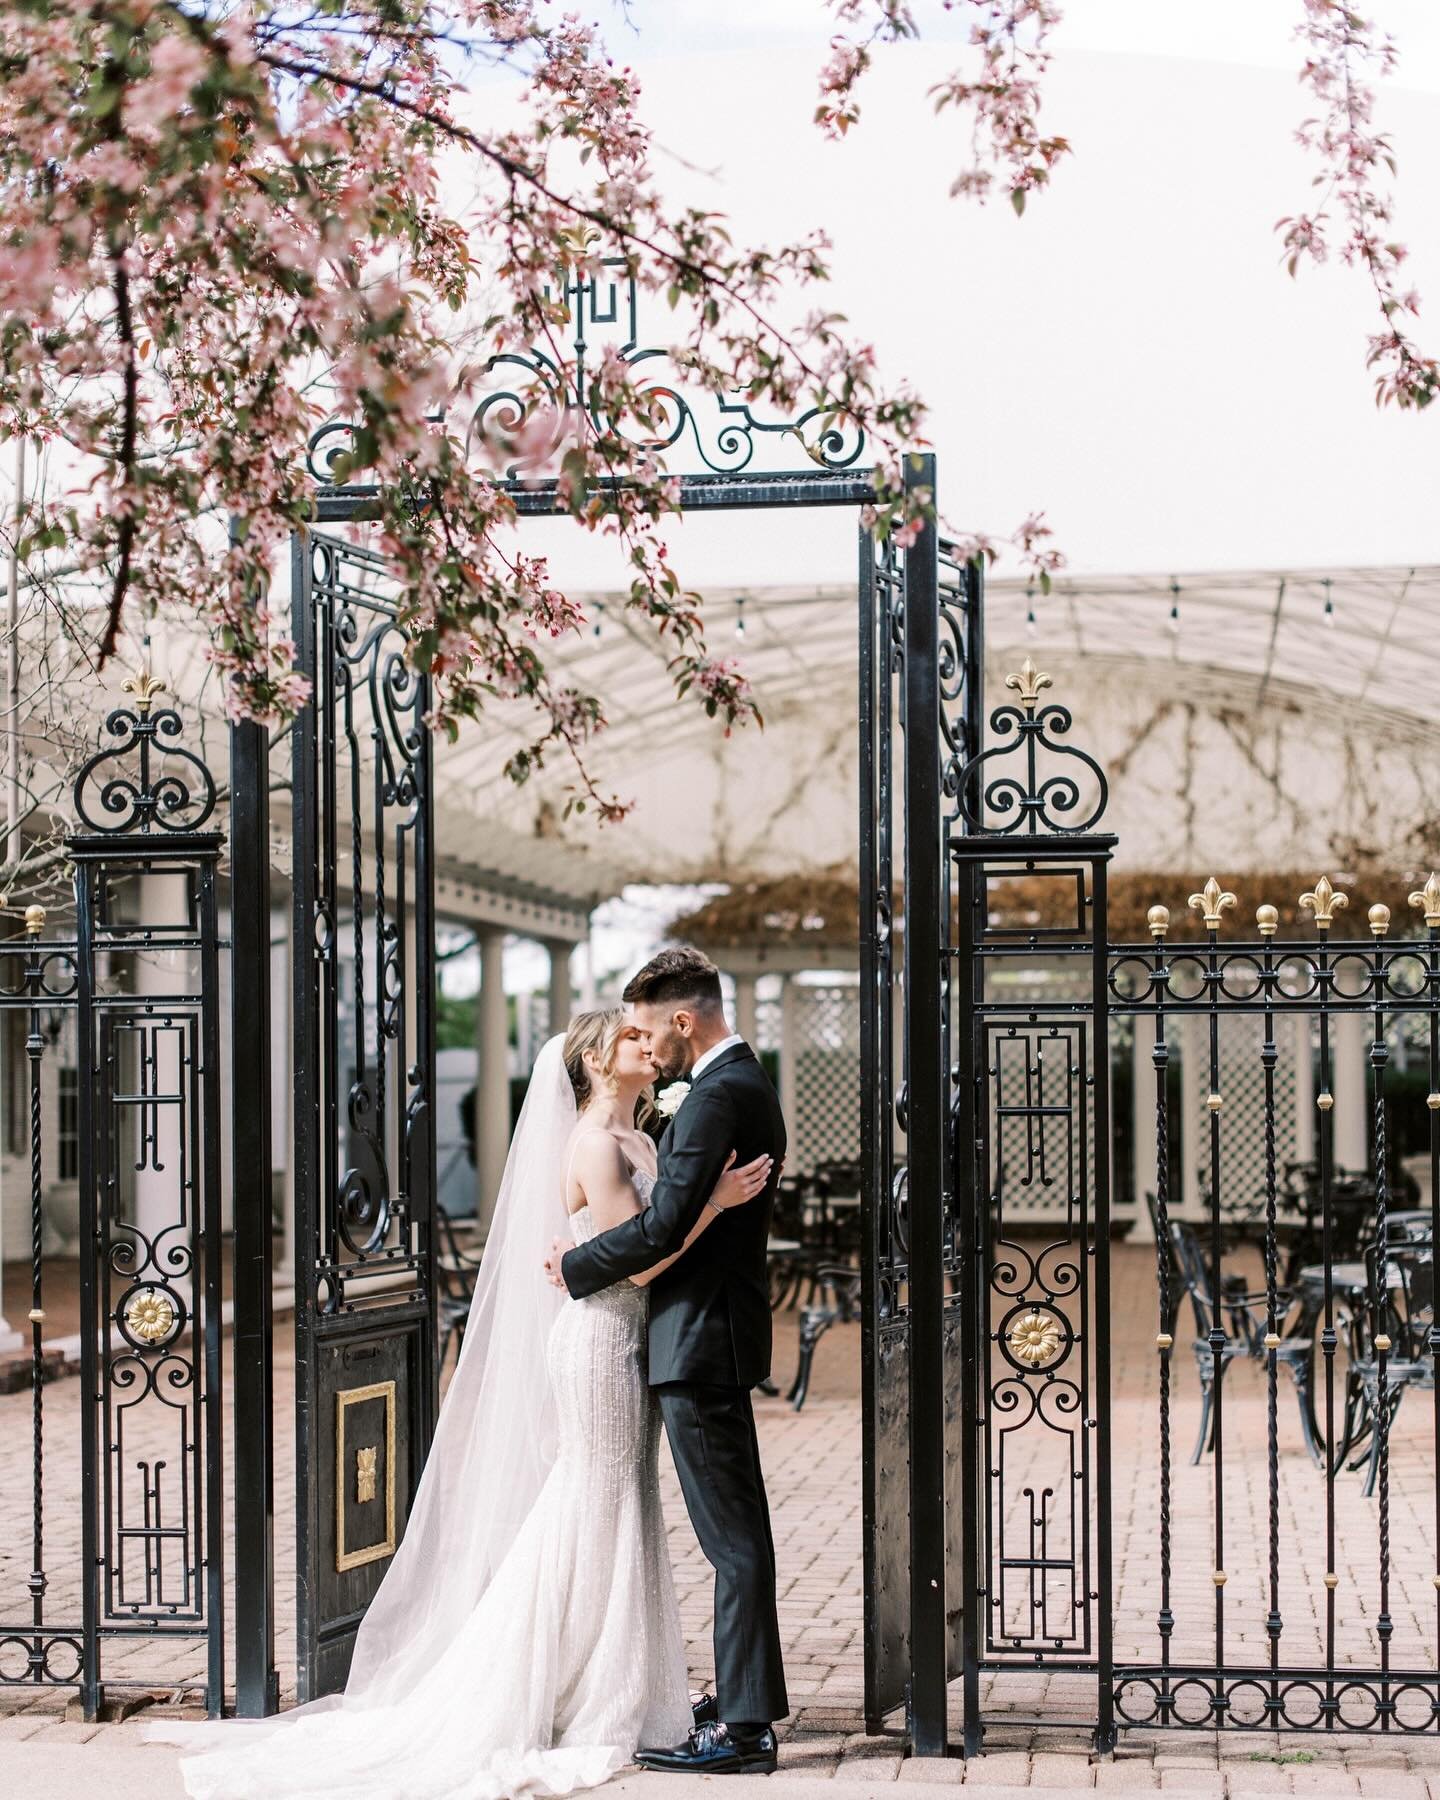 Lauren + Chandler are college sweethearts who began their new chapter as husband and wife on a beautiful spring day last weekend at the Manor House 🤍 Their wedding was filled with sweet moments as they committed their lives to one another surrounded